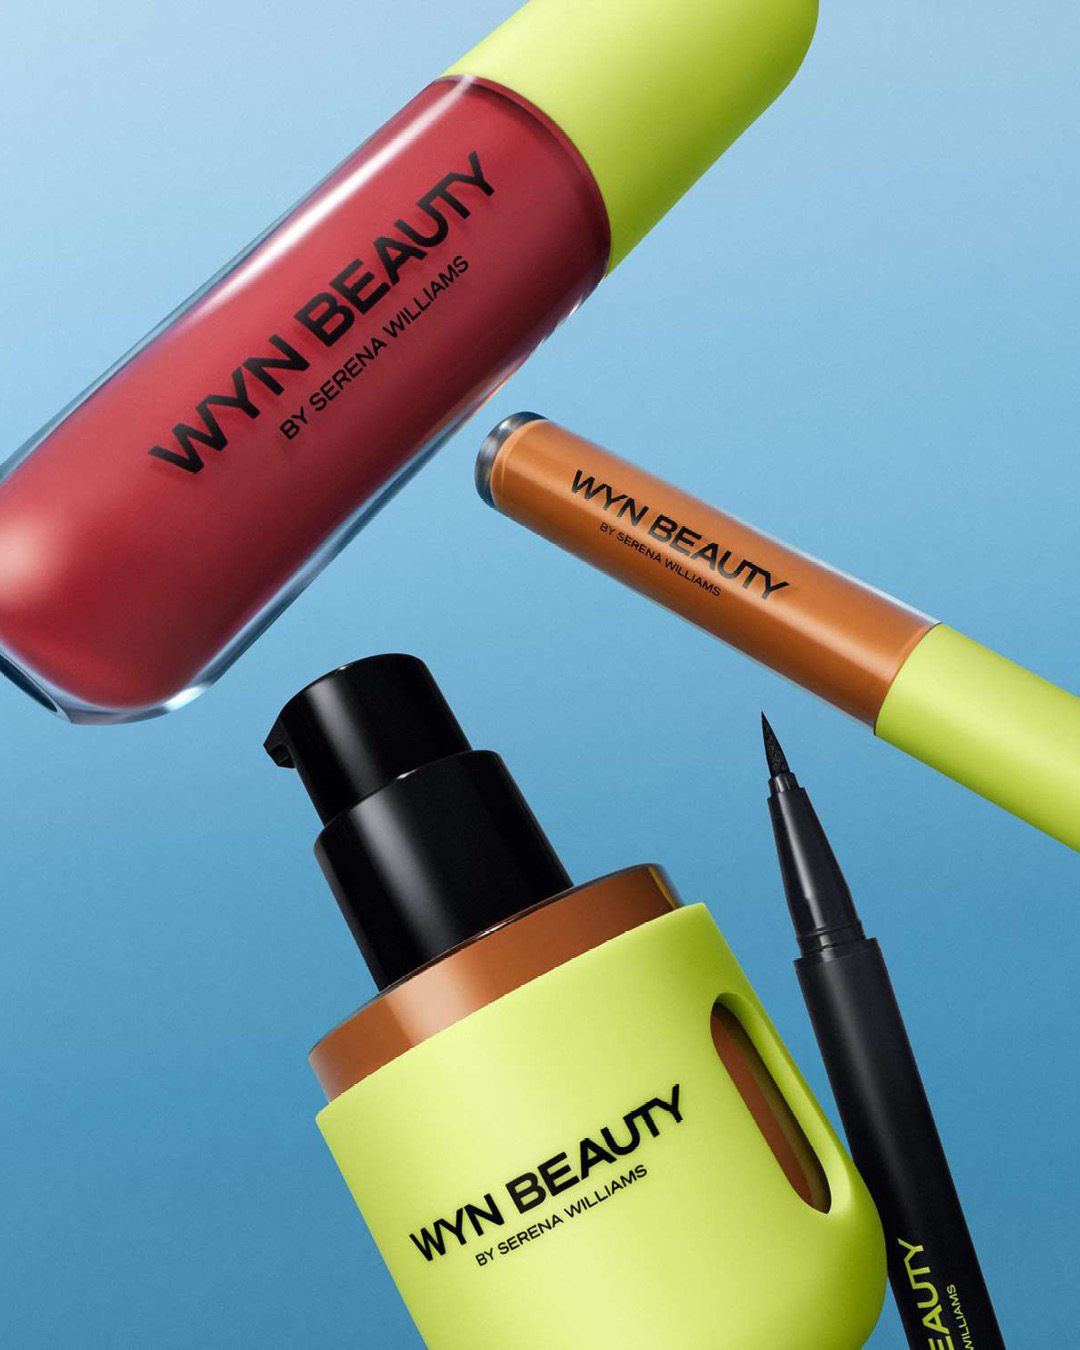 Serena Williams Debuts Wyn Beauty, an Inclusive Makeup Line Inspired by Tennis and Victory